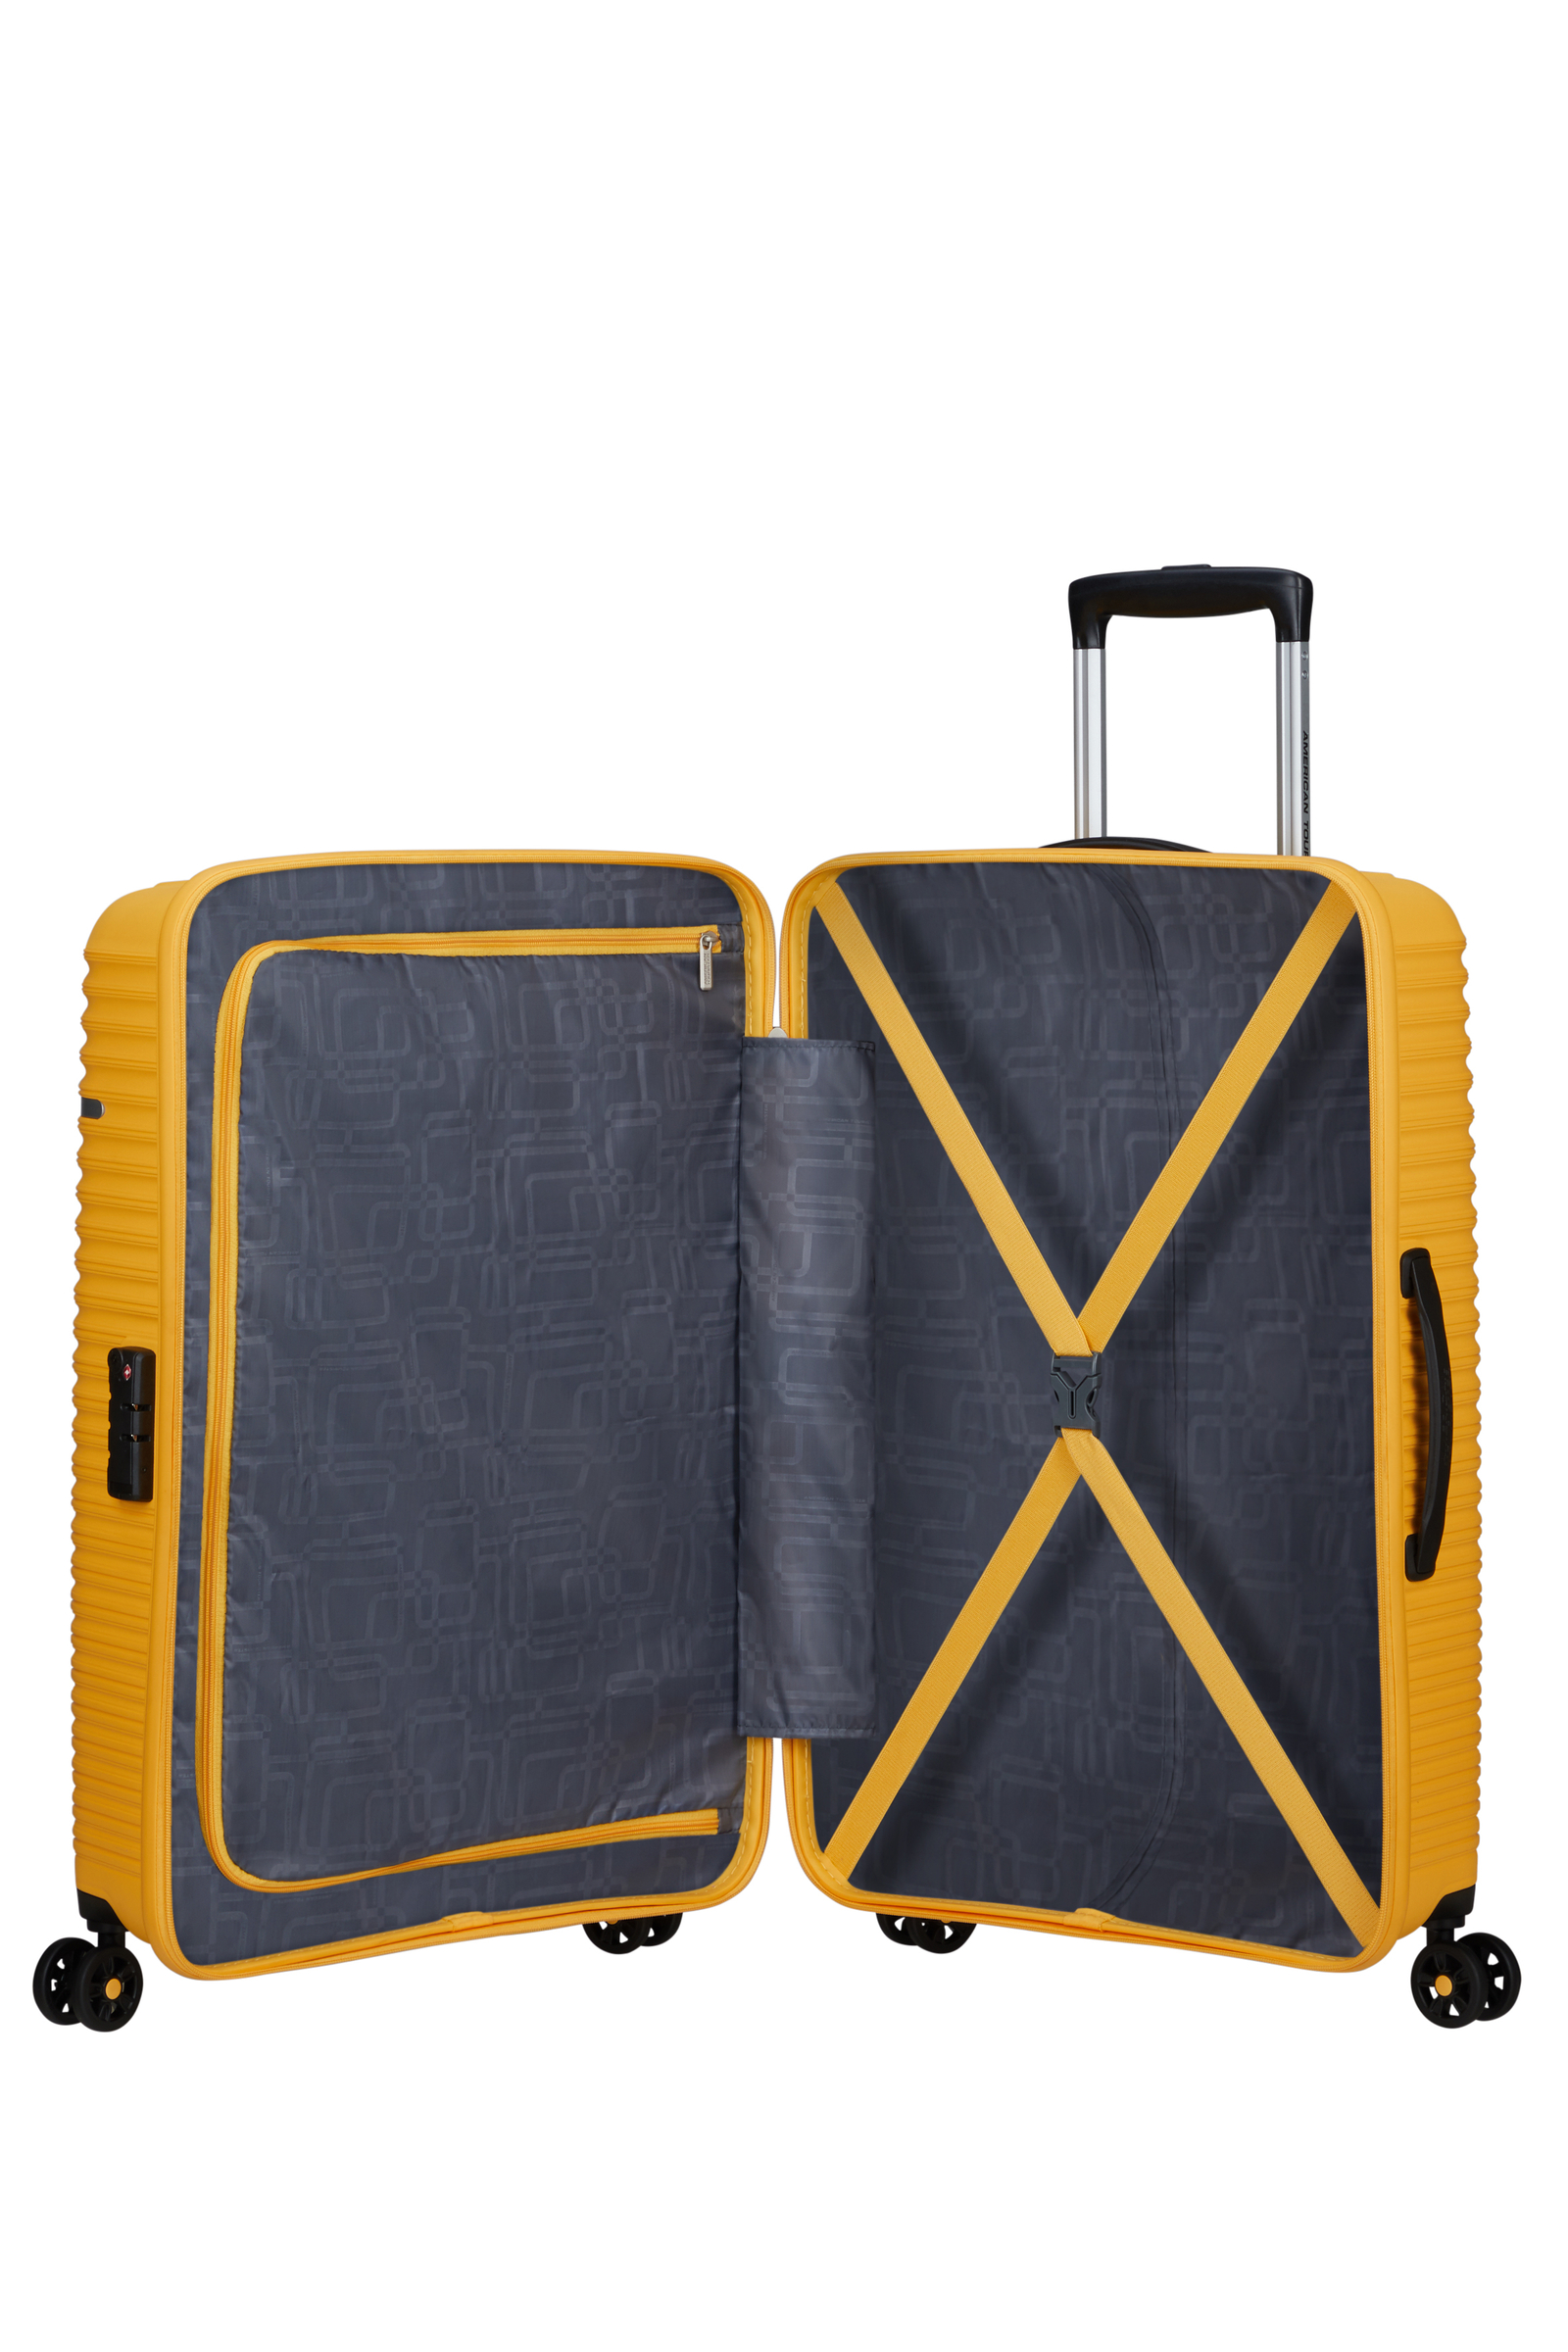 American Tourister Liftoff Koffer 79cm Gelb